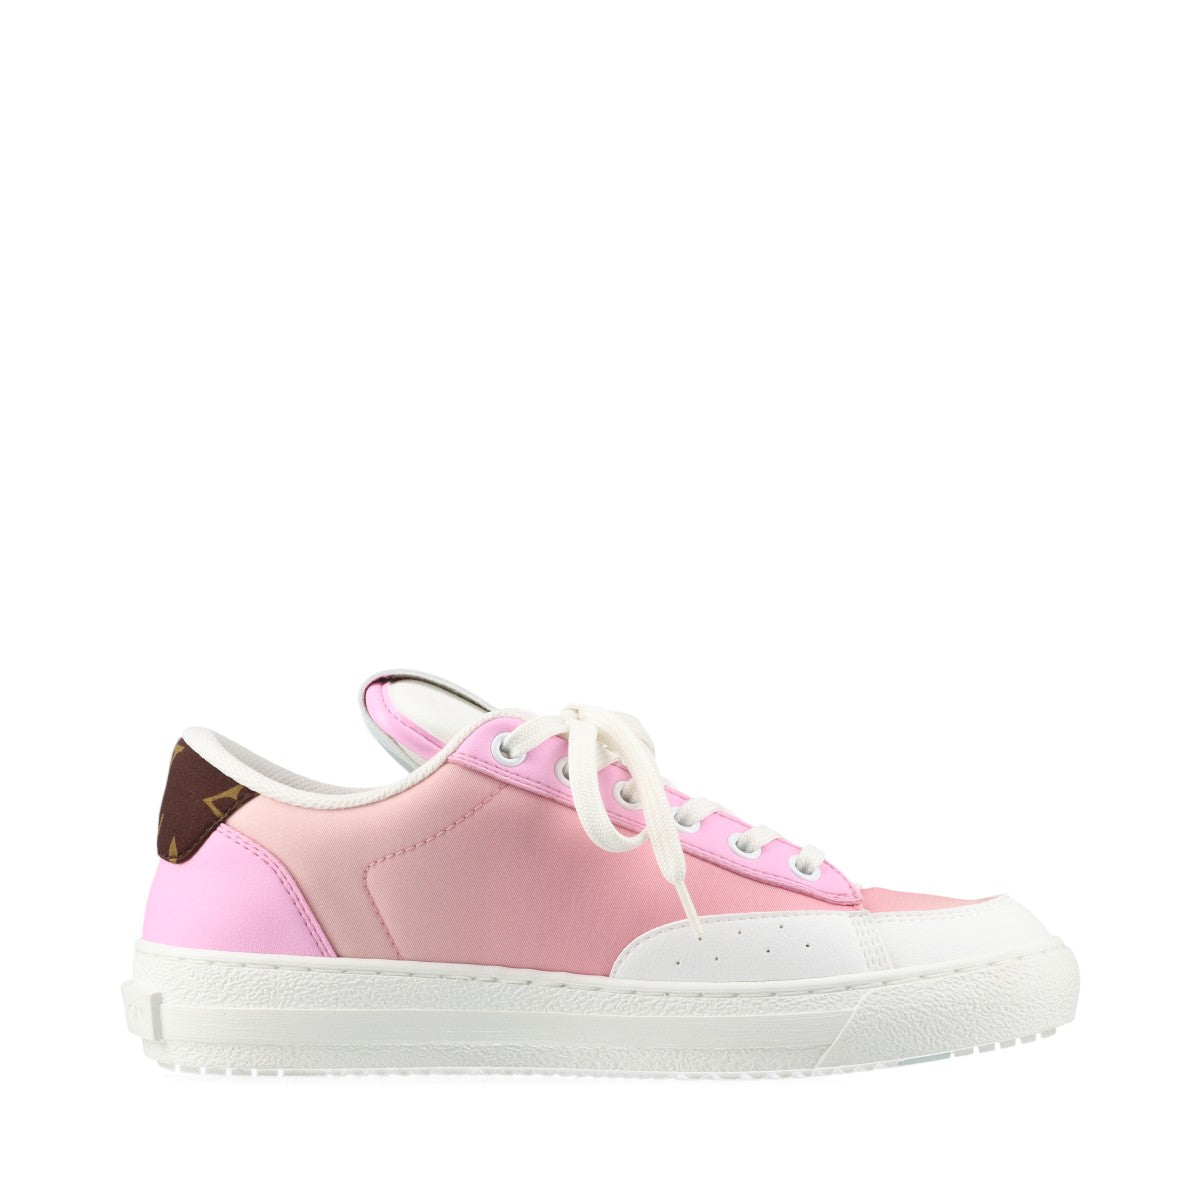 Louis Vuitton Charlie Line 22 years Leather x fabric Sneakers 36 Ladies' White x pink LD0232 Replaceable cord box There is a storage bag